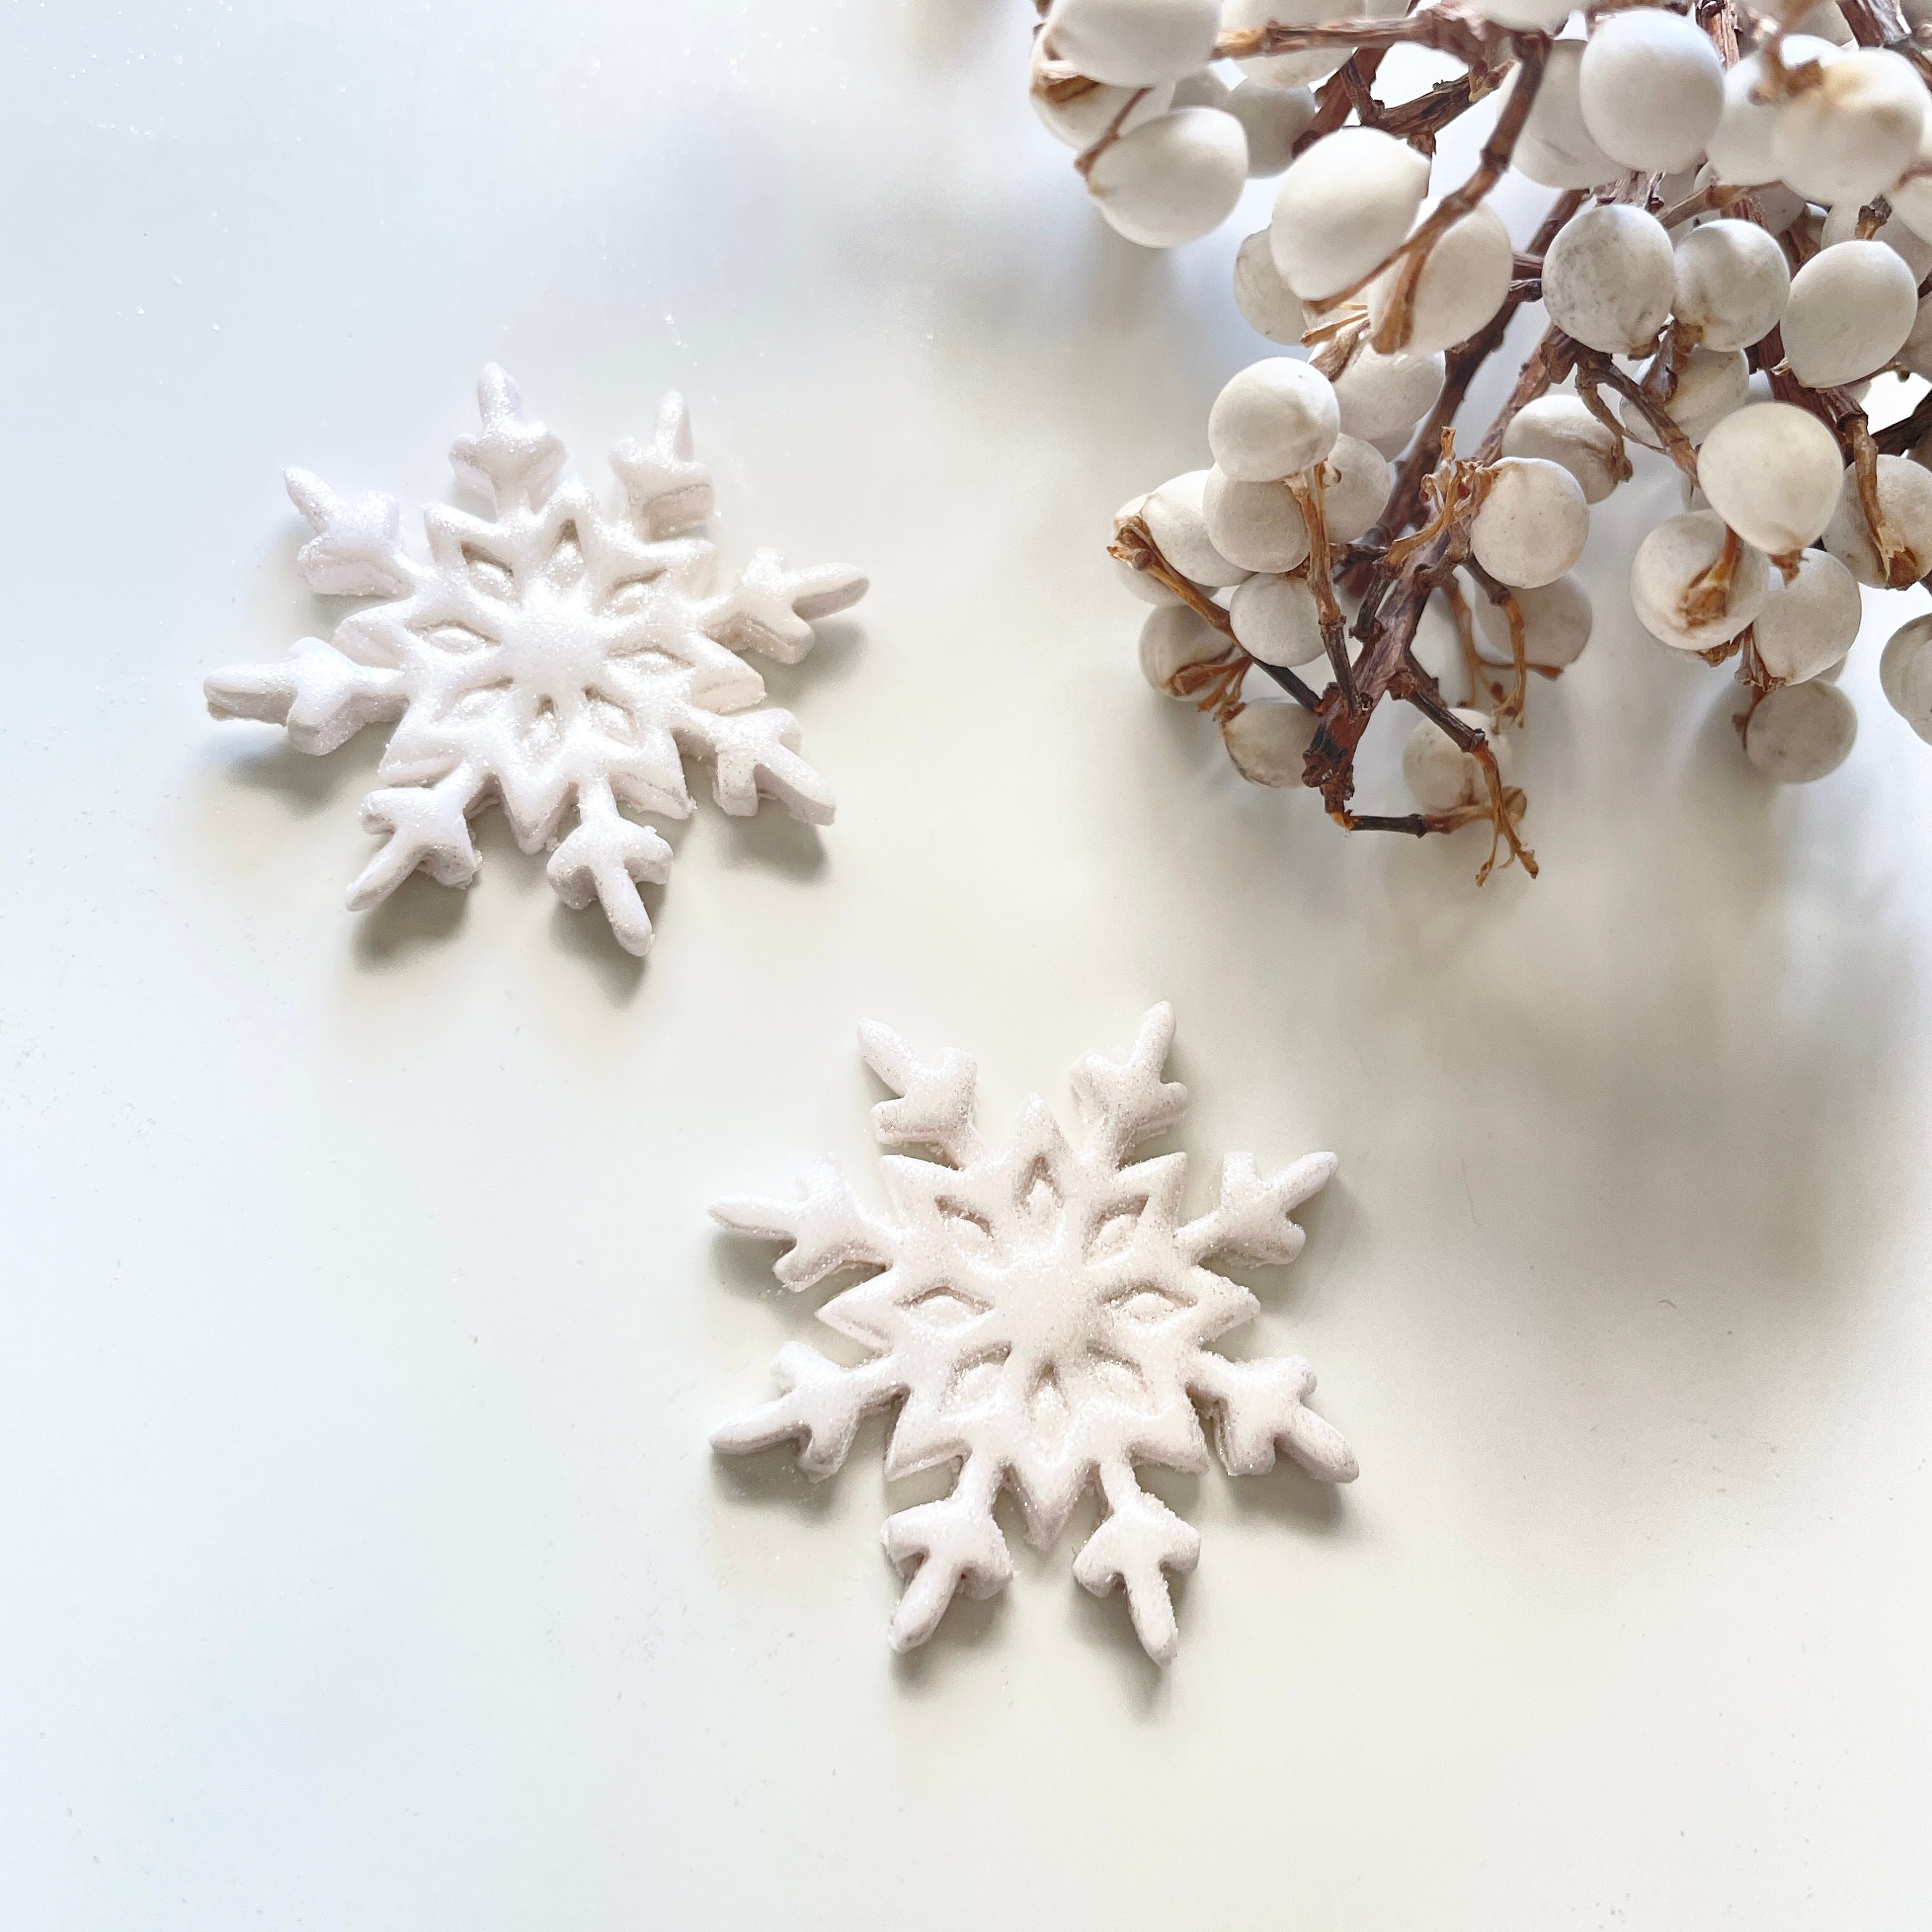 Snowflake Clay Stamp – BabylonCutters